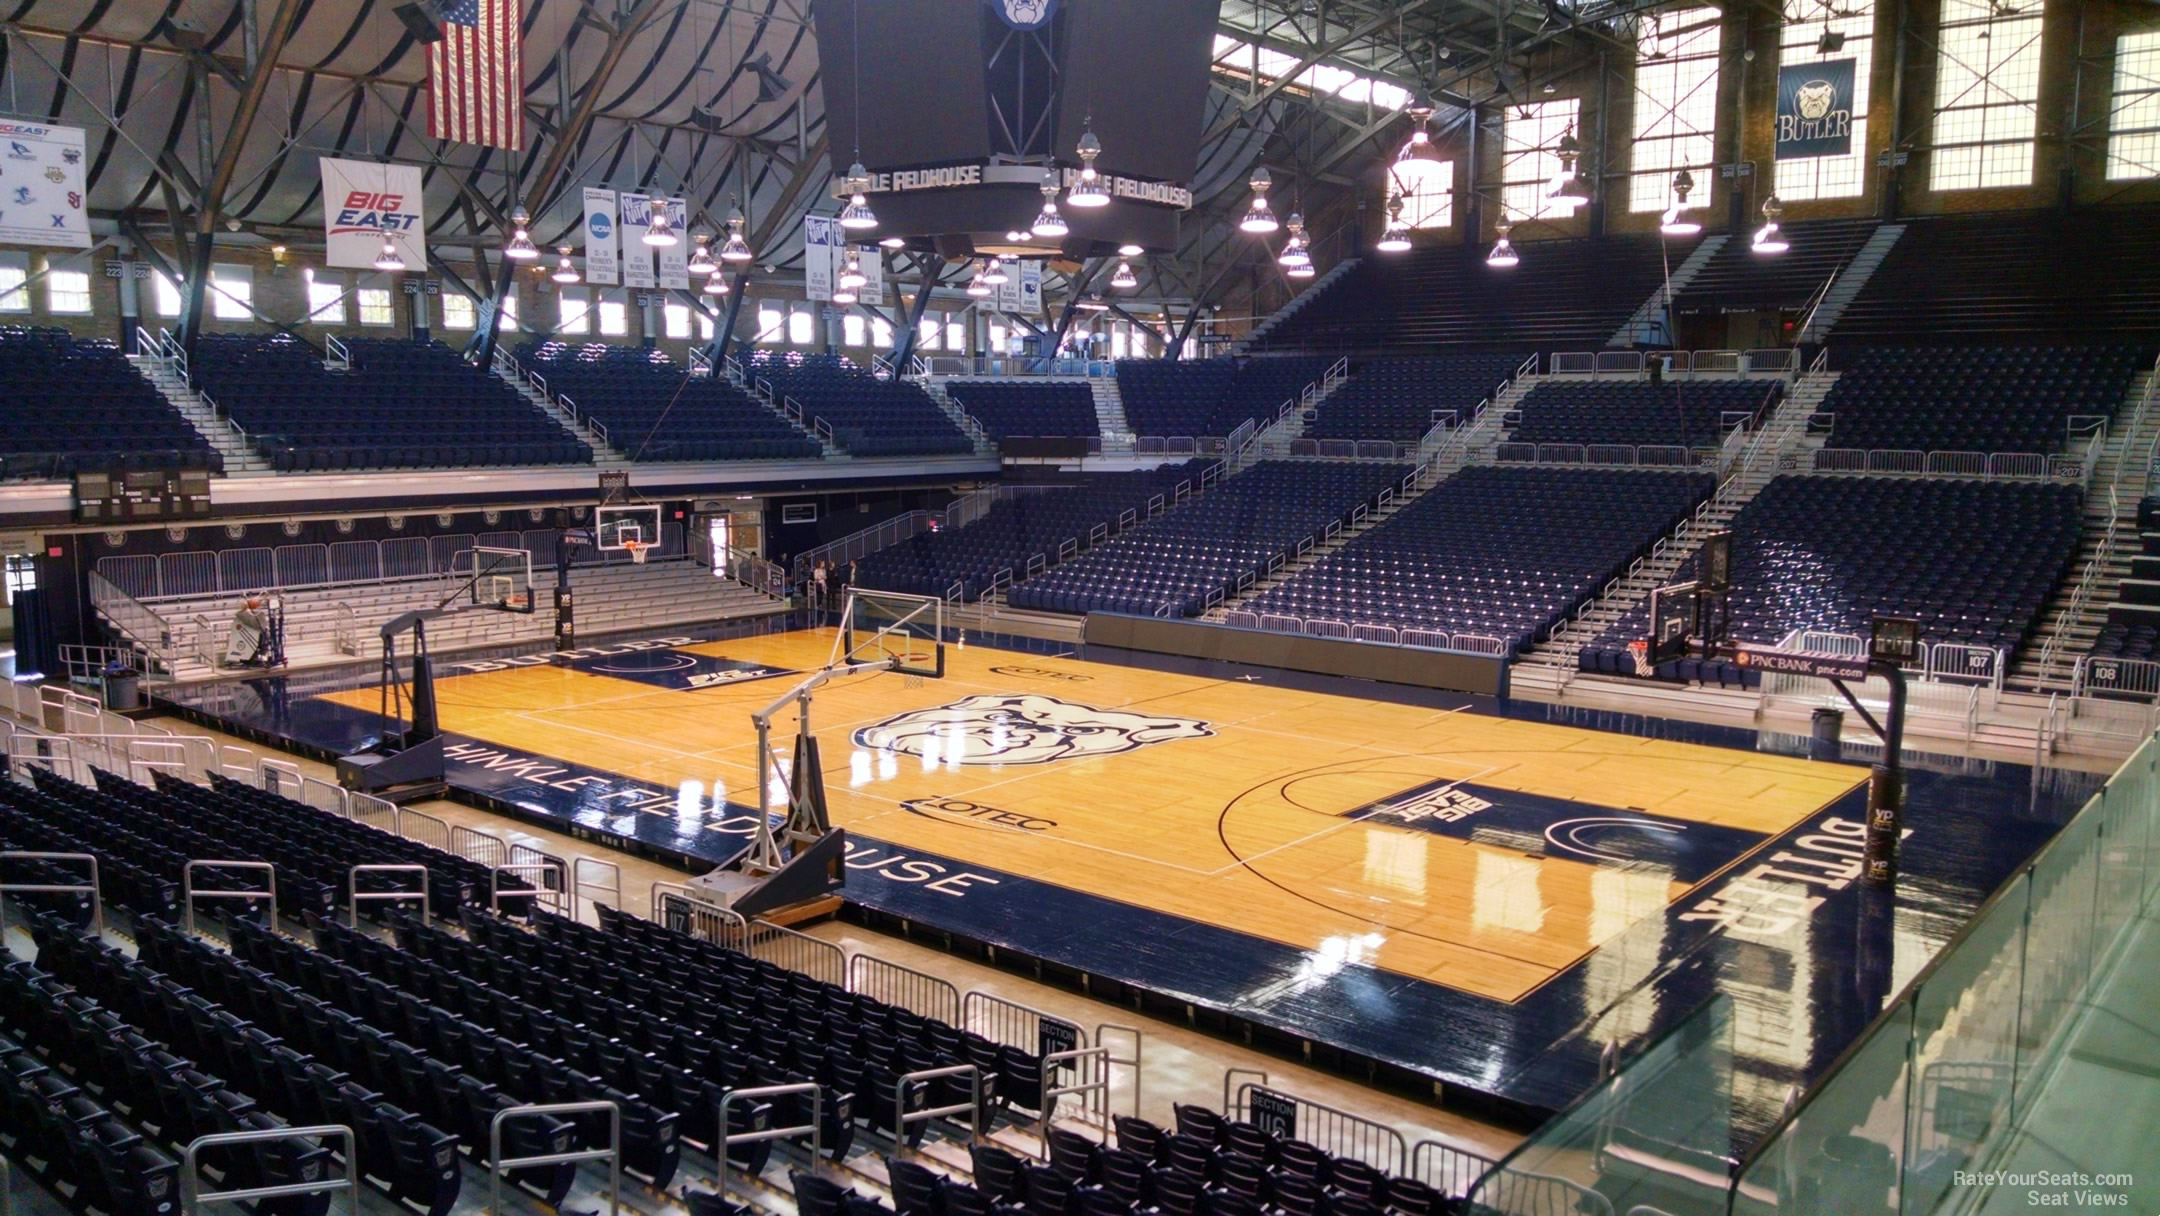 section 215, row 4 seat view  - hinkle fieldhouse